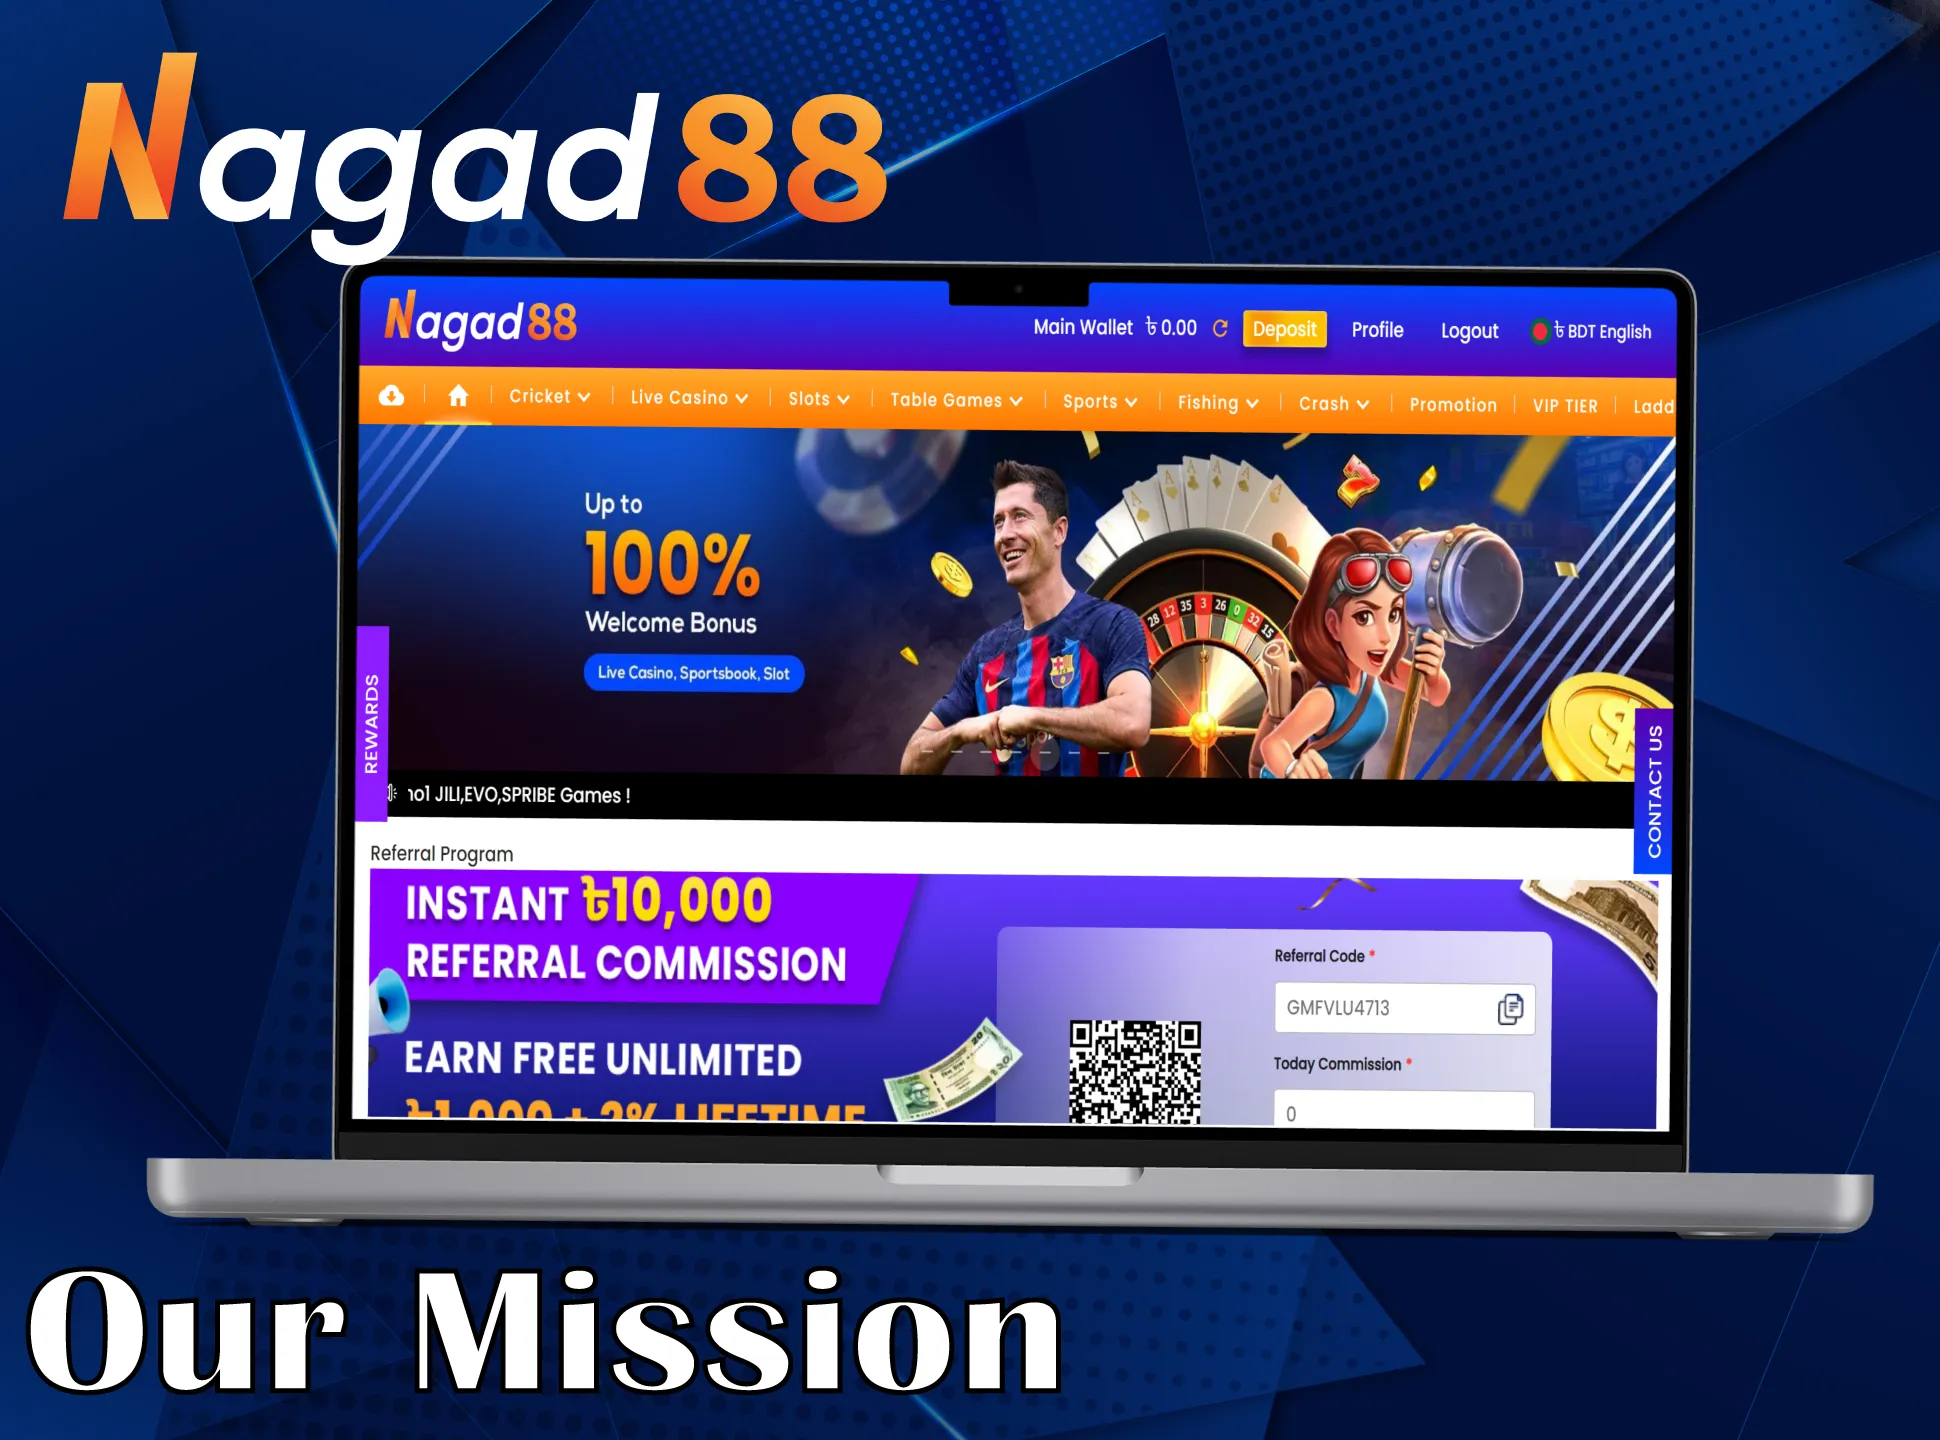 Learn more about the Nagad88 mission .